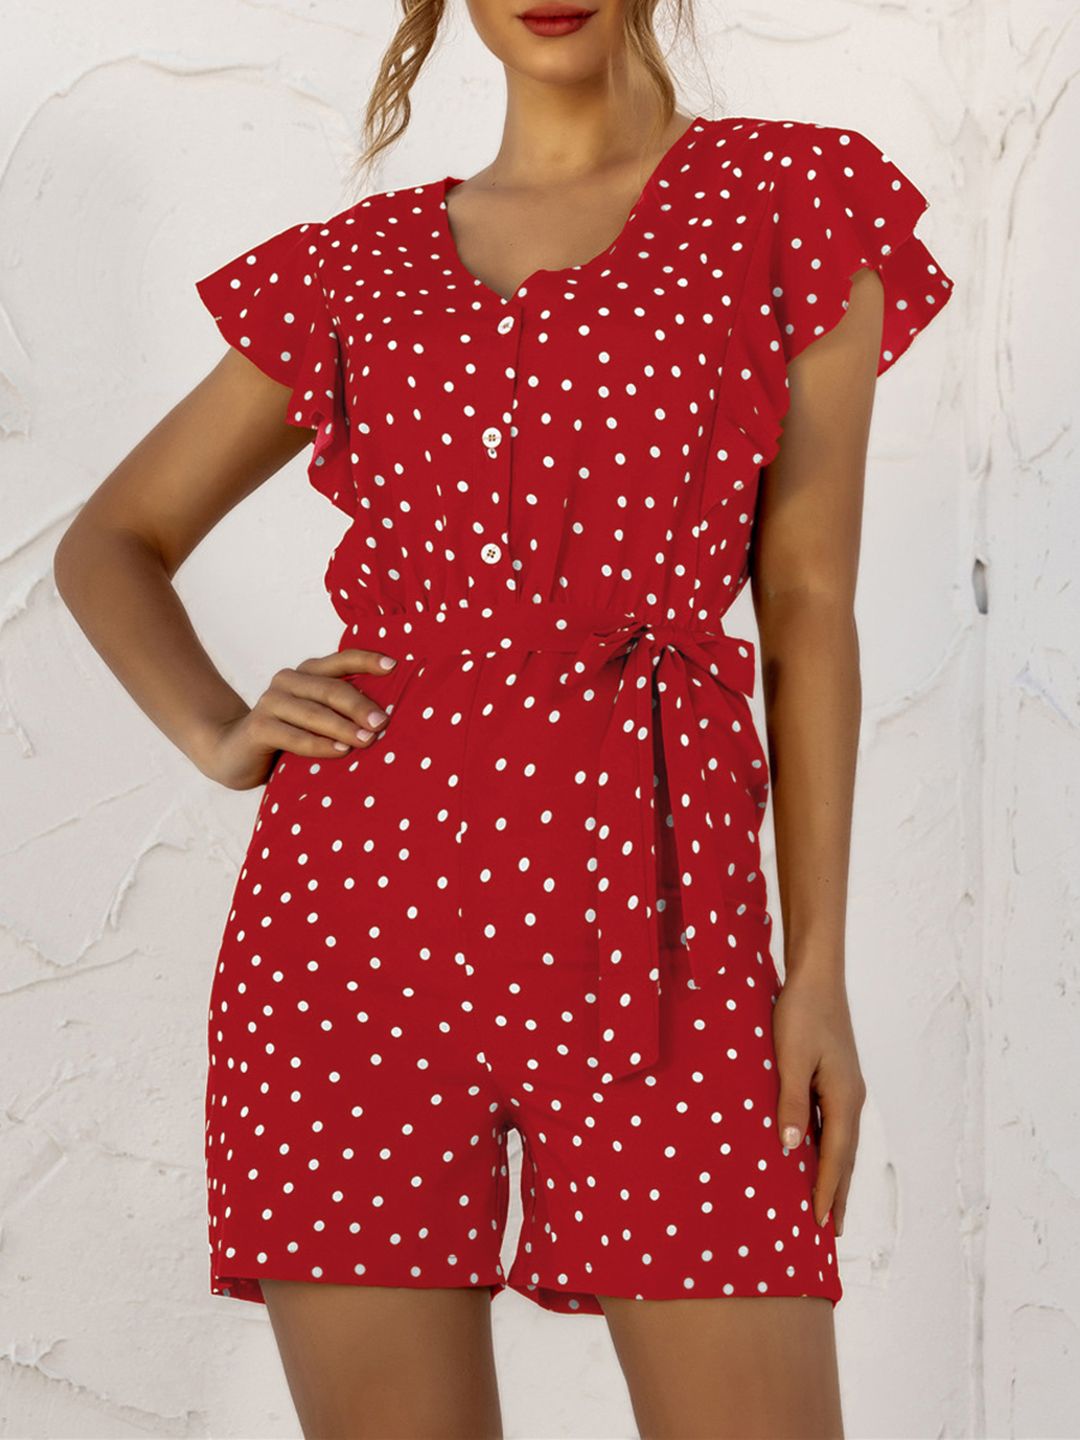 URBANIC Red & White Polka Dots Printed Playsuit with Belt Price in India